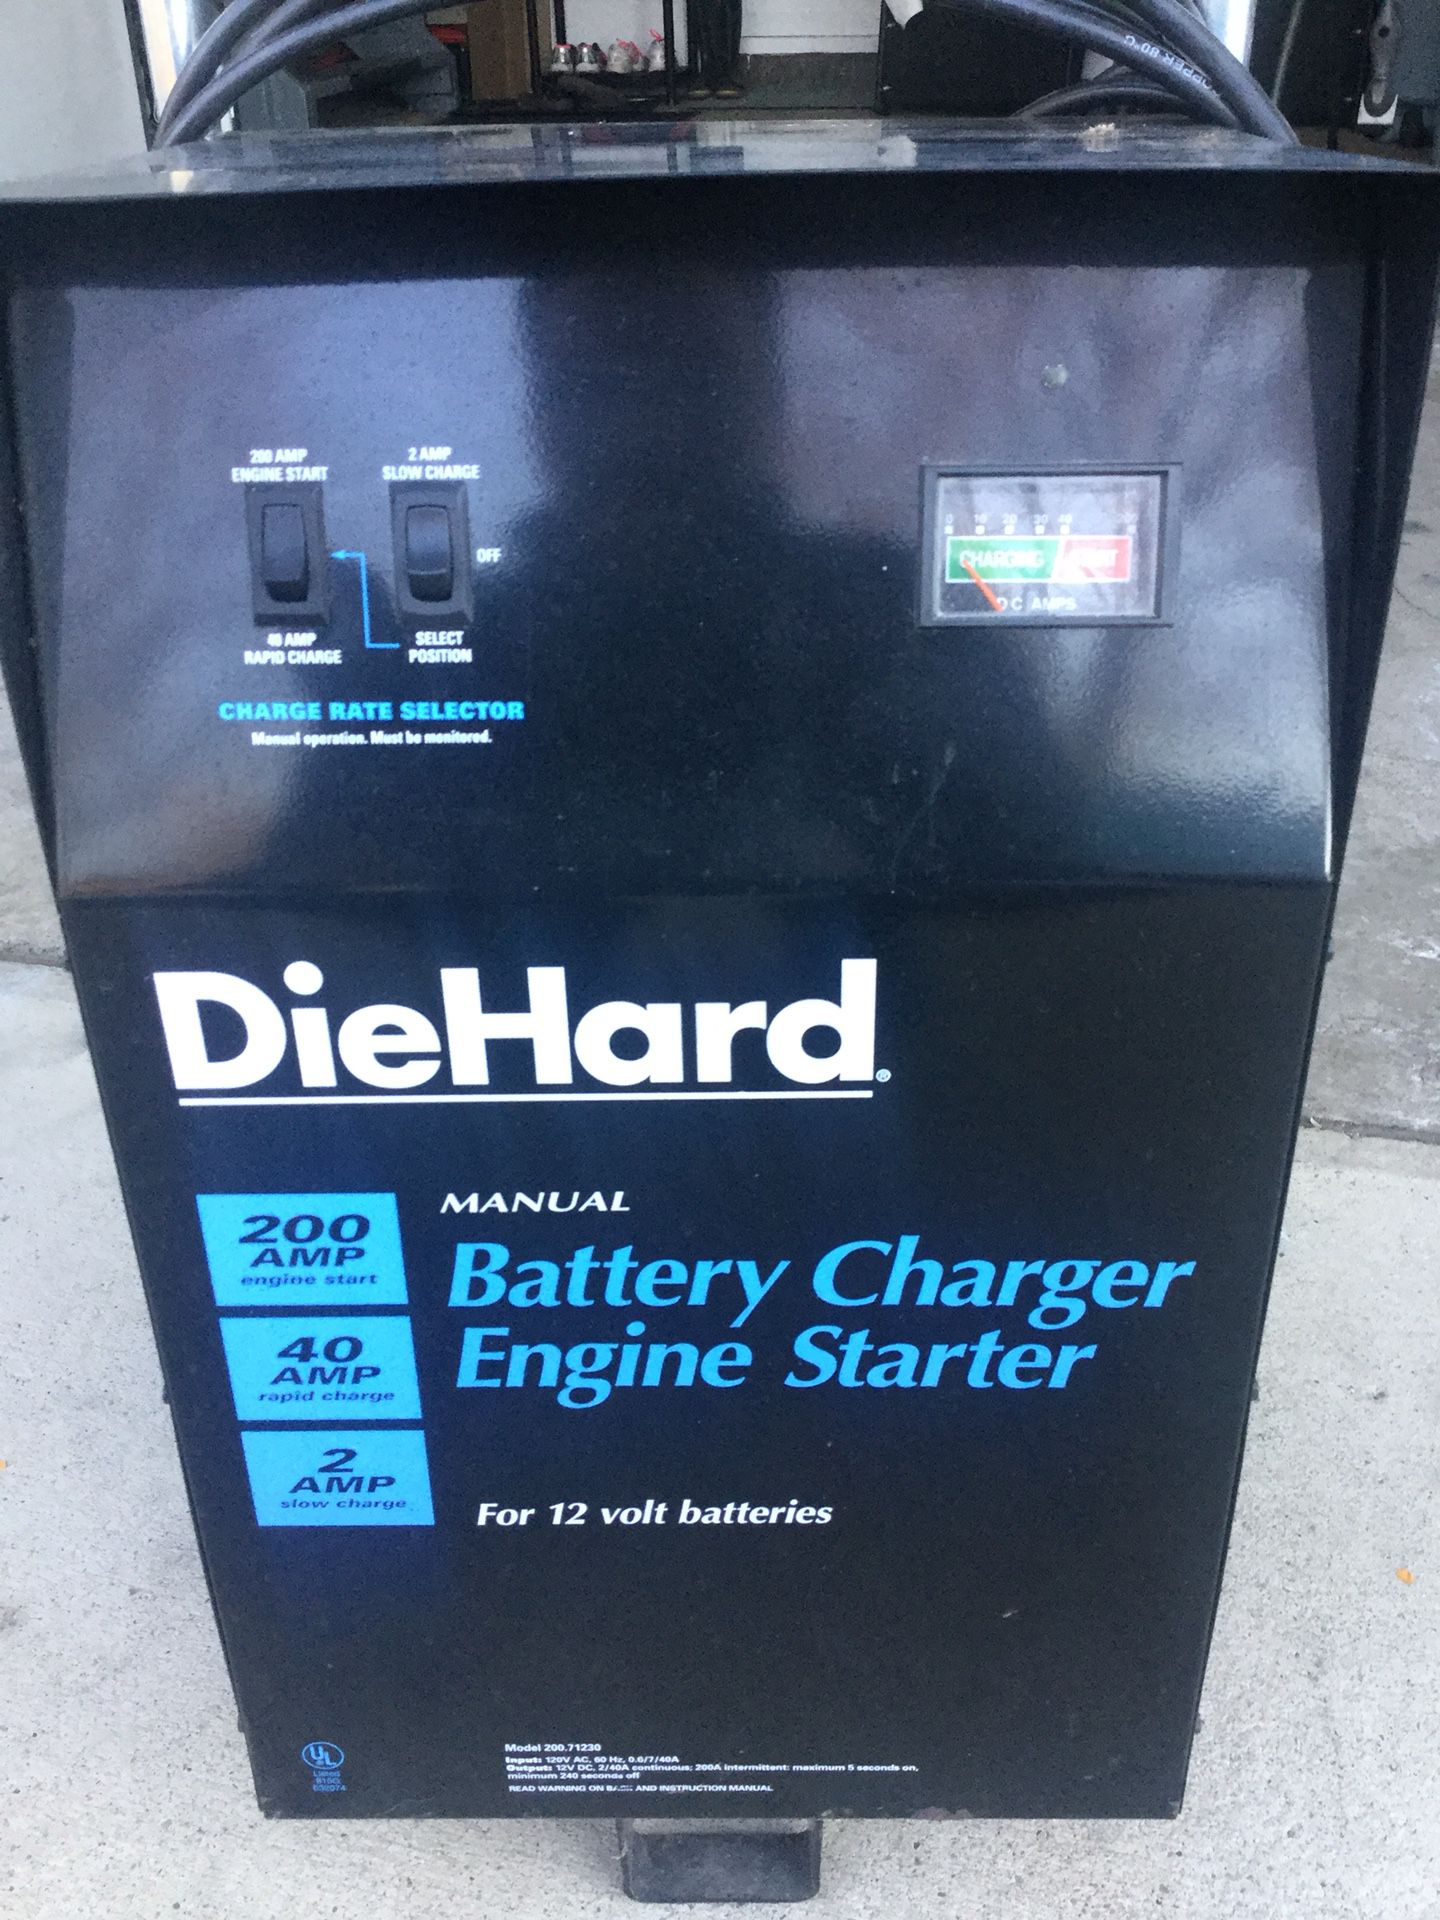 DieHard battery charger and starter Model  for Sale in Amherst, OH  - OfferUp